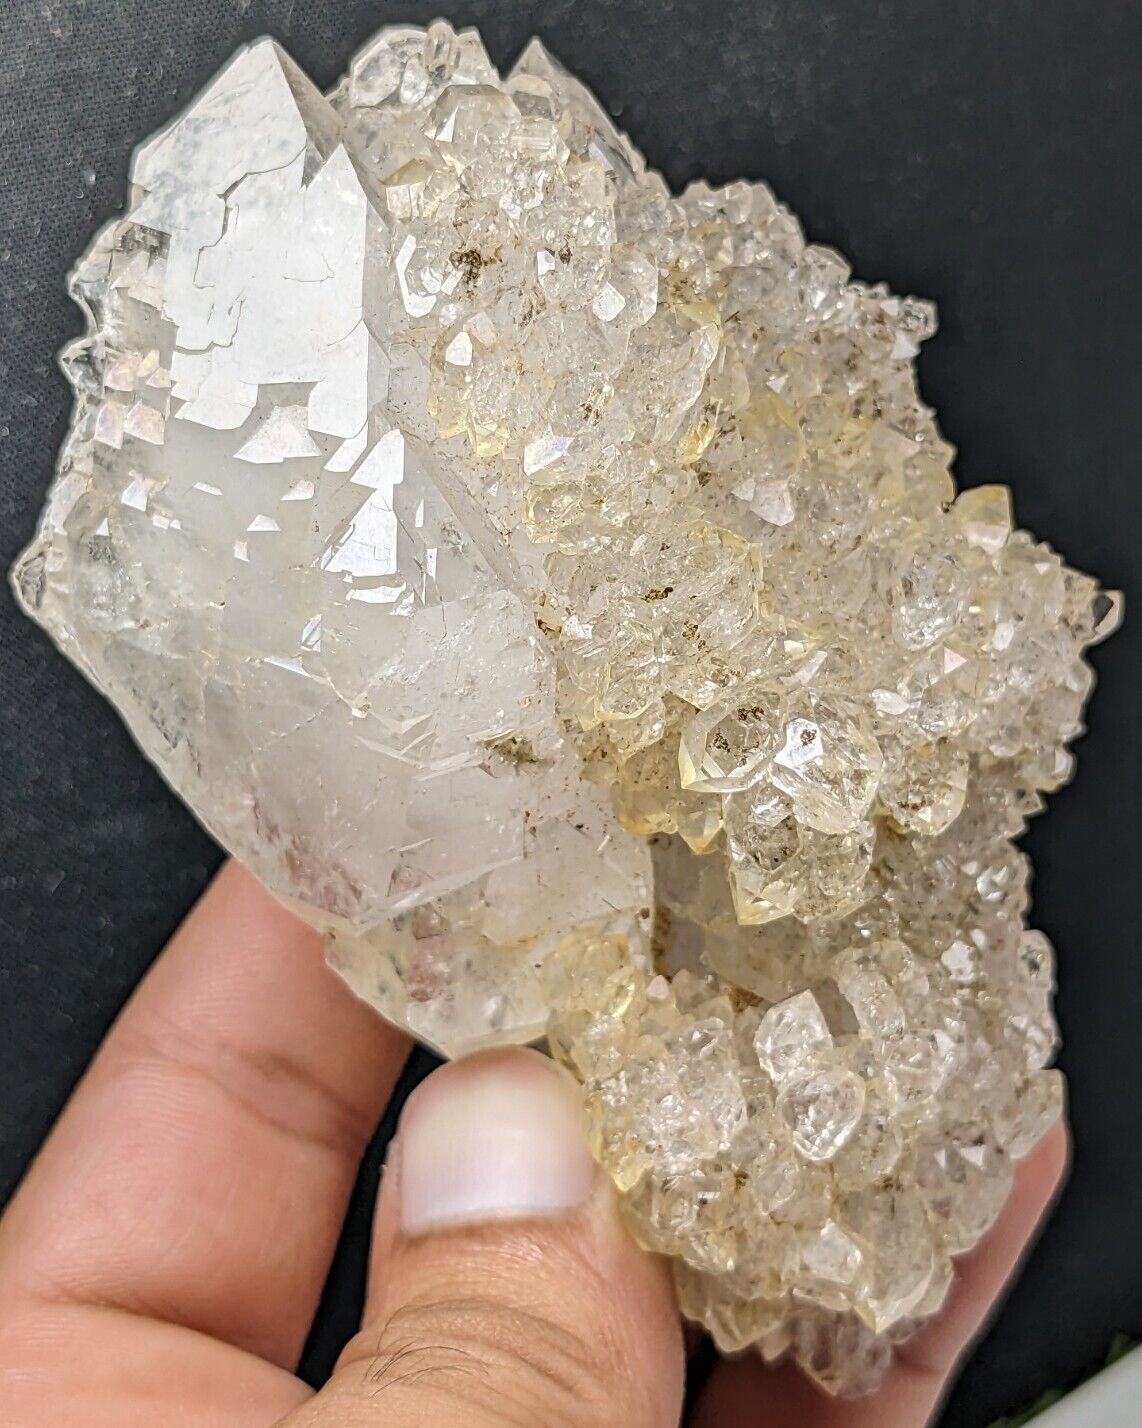 Unusual and very interesting formation of an elestiao Quartz with numerous small